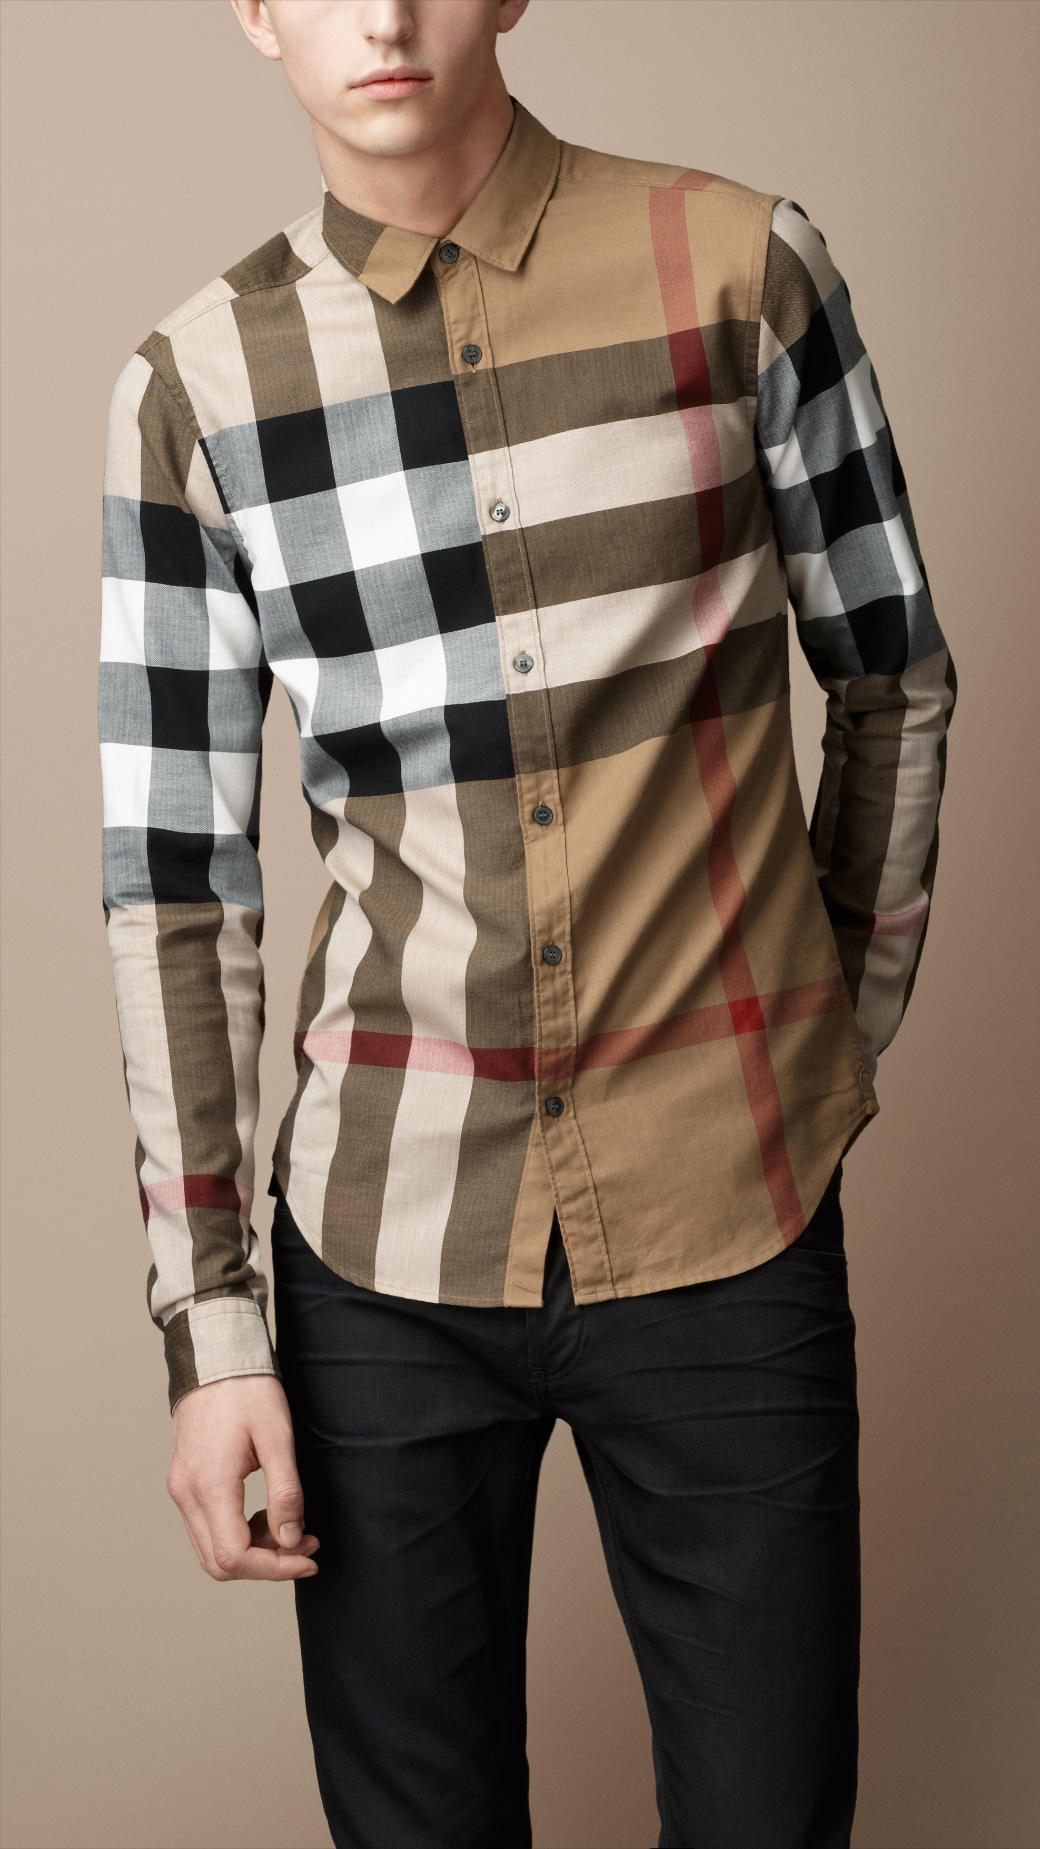 Lyst - Burberry Brit Exploded Check Cotton Shirt in Natural for Men